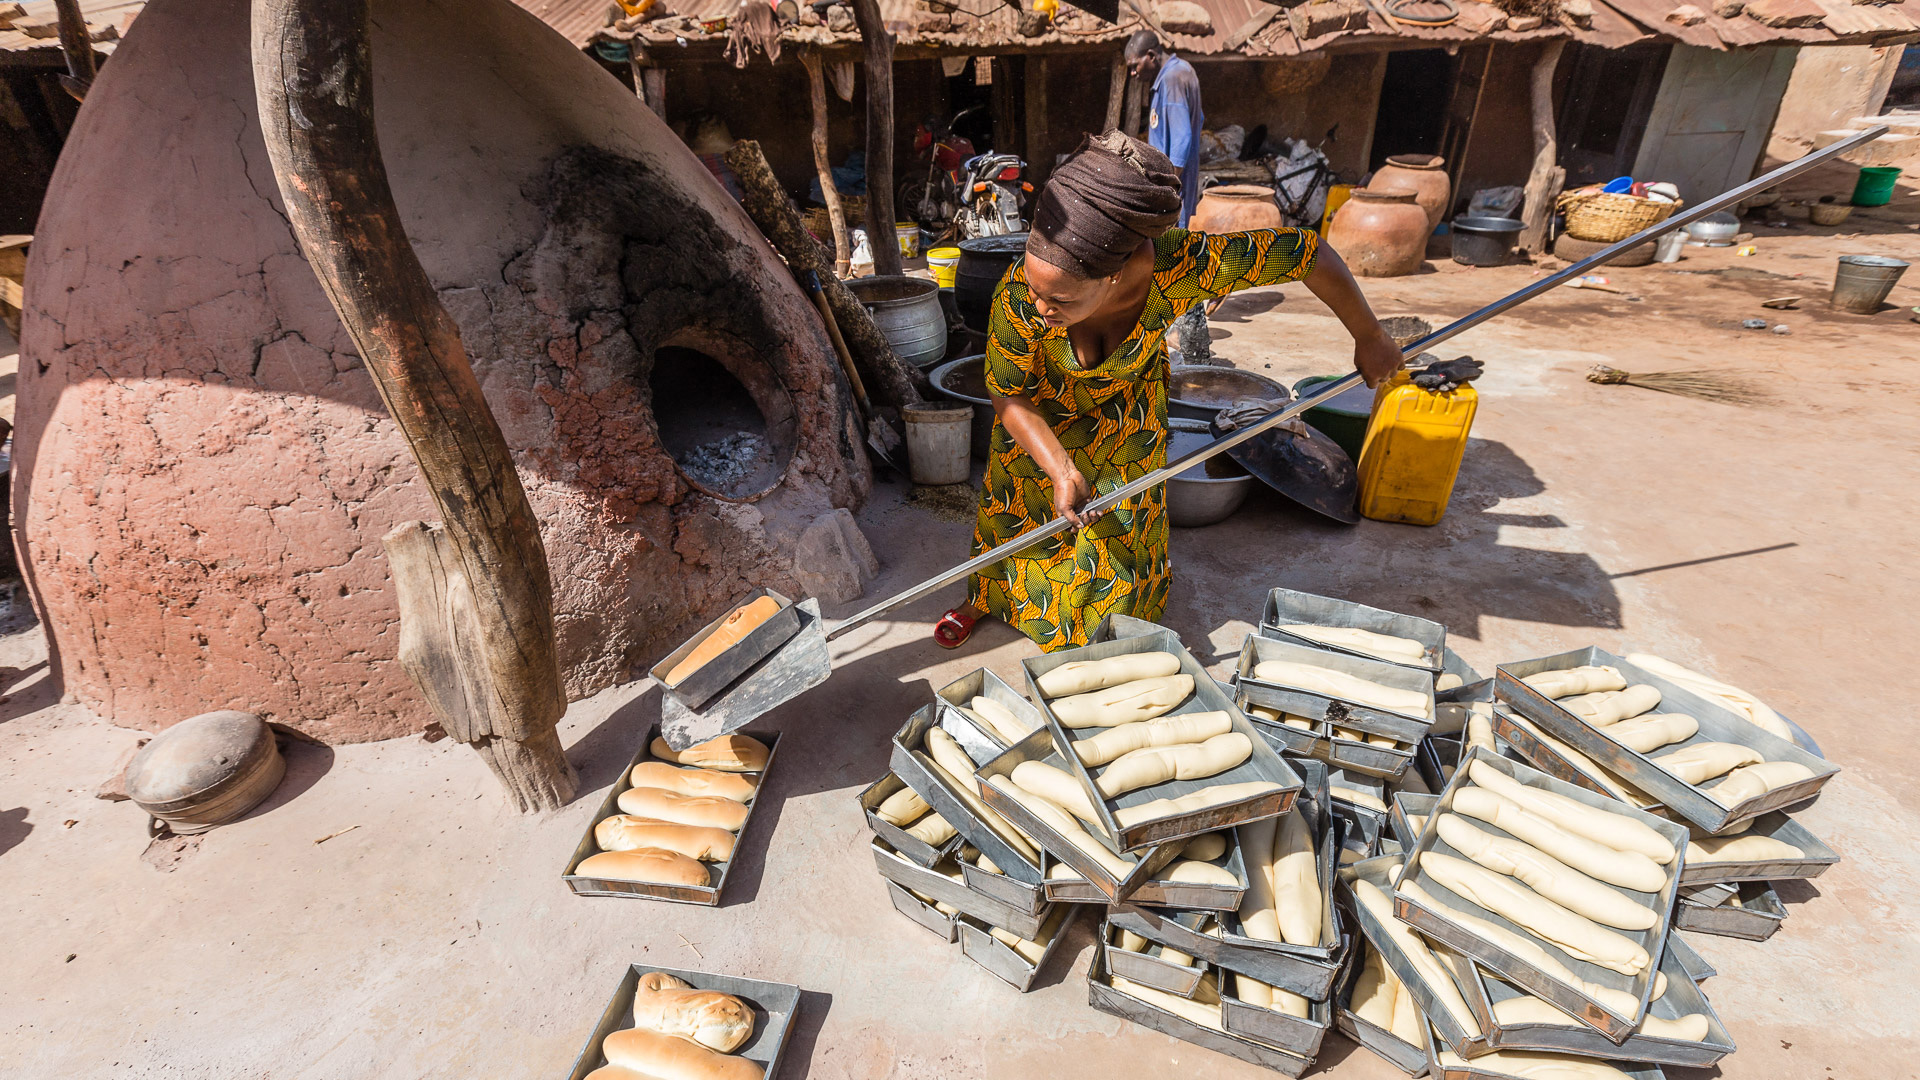 In Nalerigu, Ghana, the entrepreneurial women of the Kurayiri family run a bread baking business out of their family compound. 